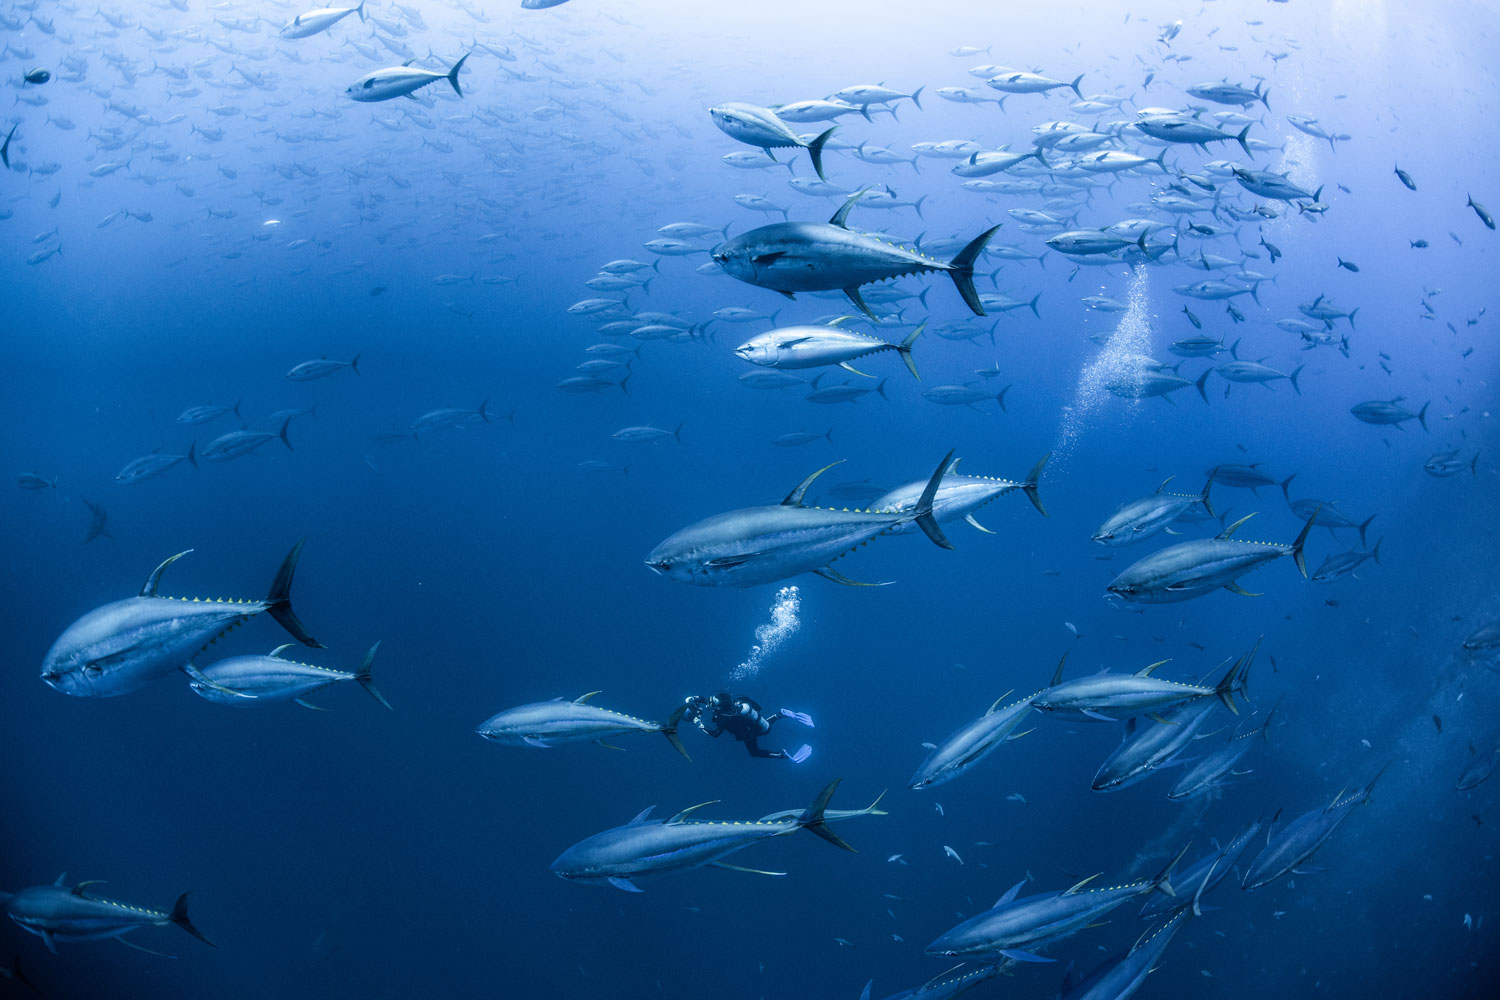 SeafoodSource: Report declares tuna stocks in Western and Central Pacific Ocean not overfished